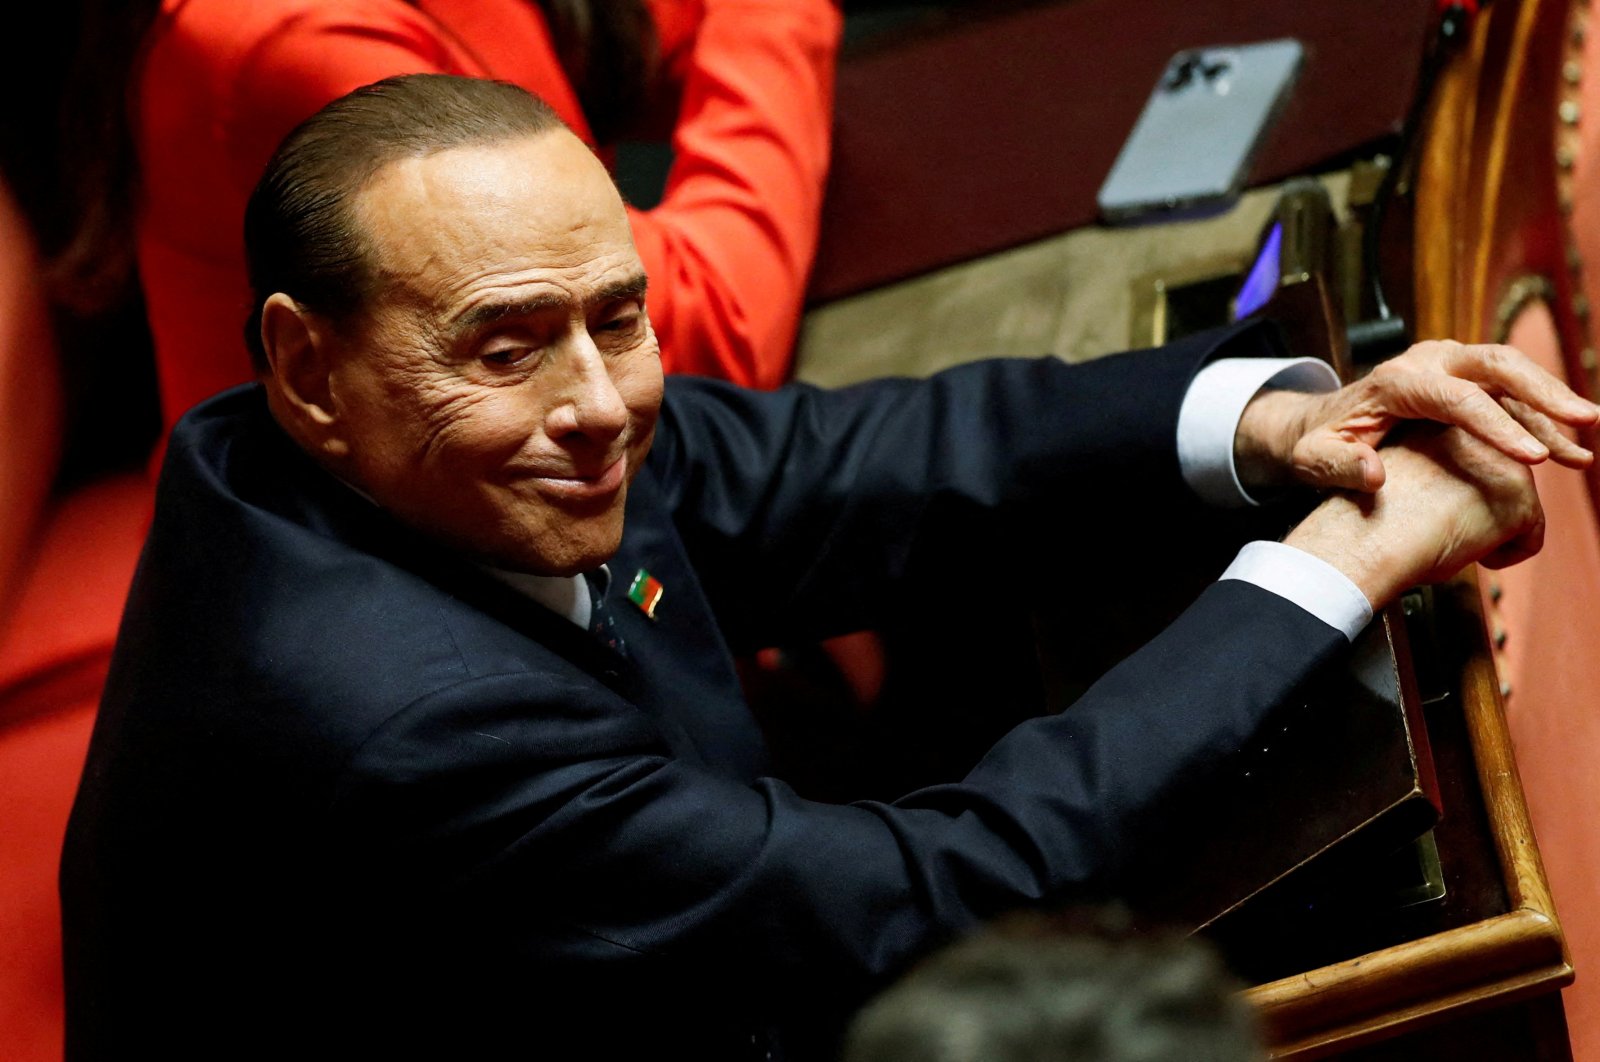 Forza Italia leader and former Prime Minister Silvio Berlusconi sits in the upper house of parliament, Rome, Italy, Oct. 13, 2022. (Reuters Photo)